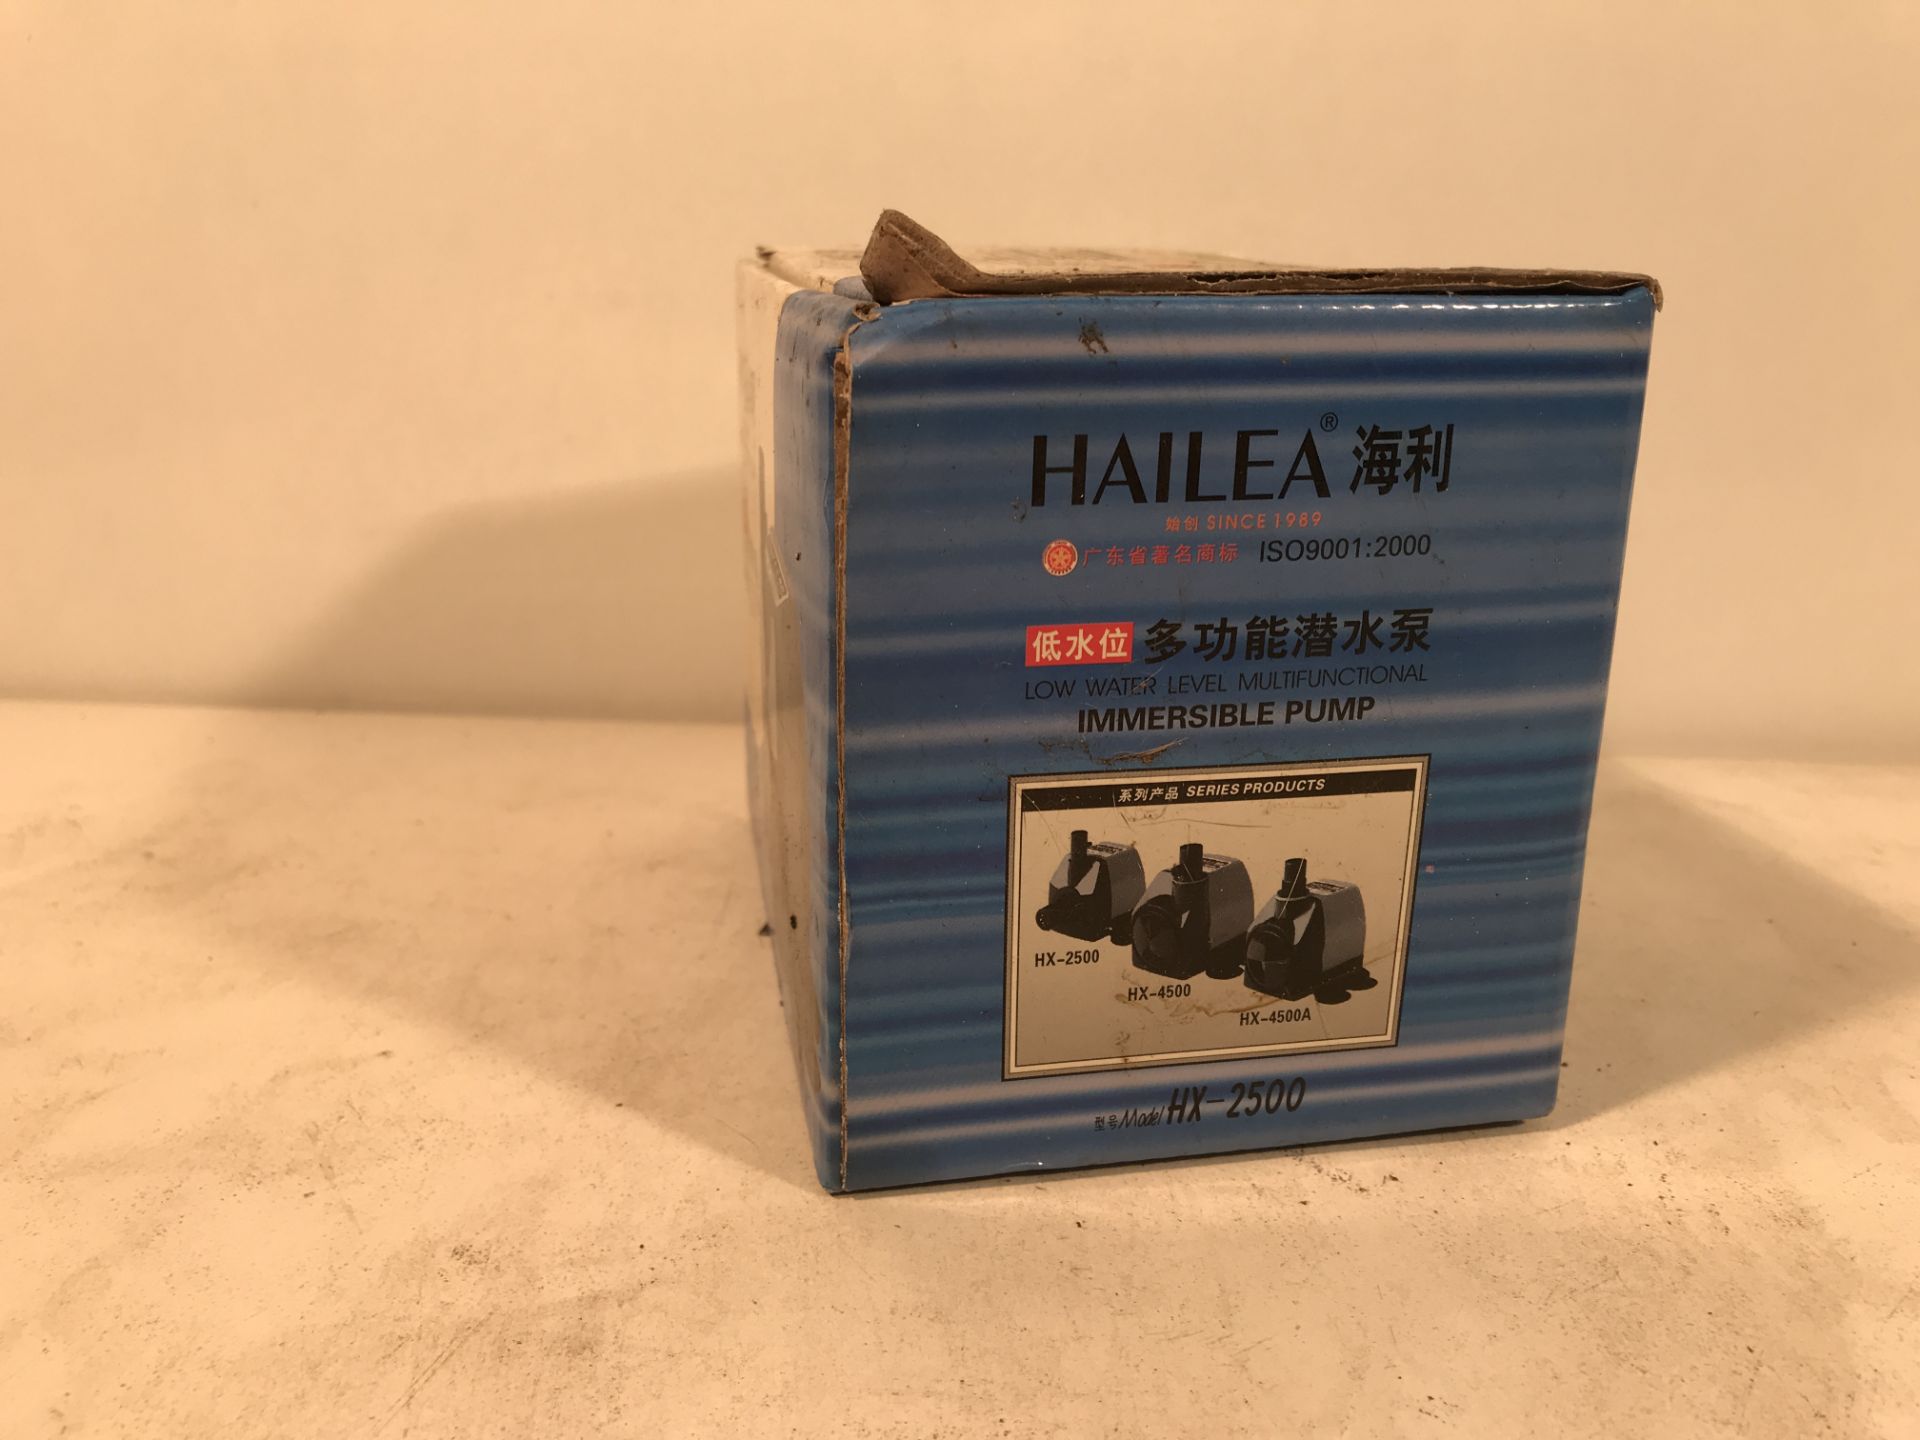 5 x Hailea Immersible Pumps - Image 4 of 4